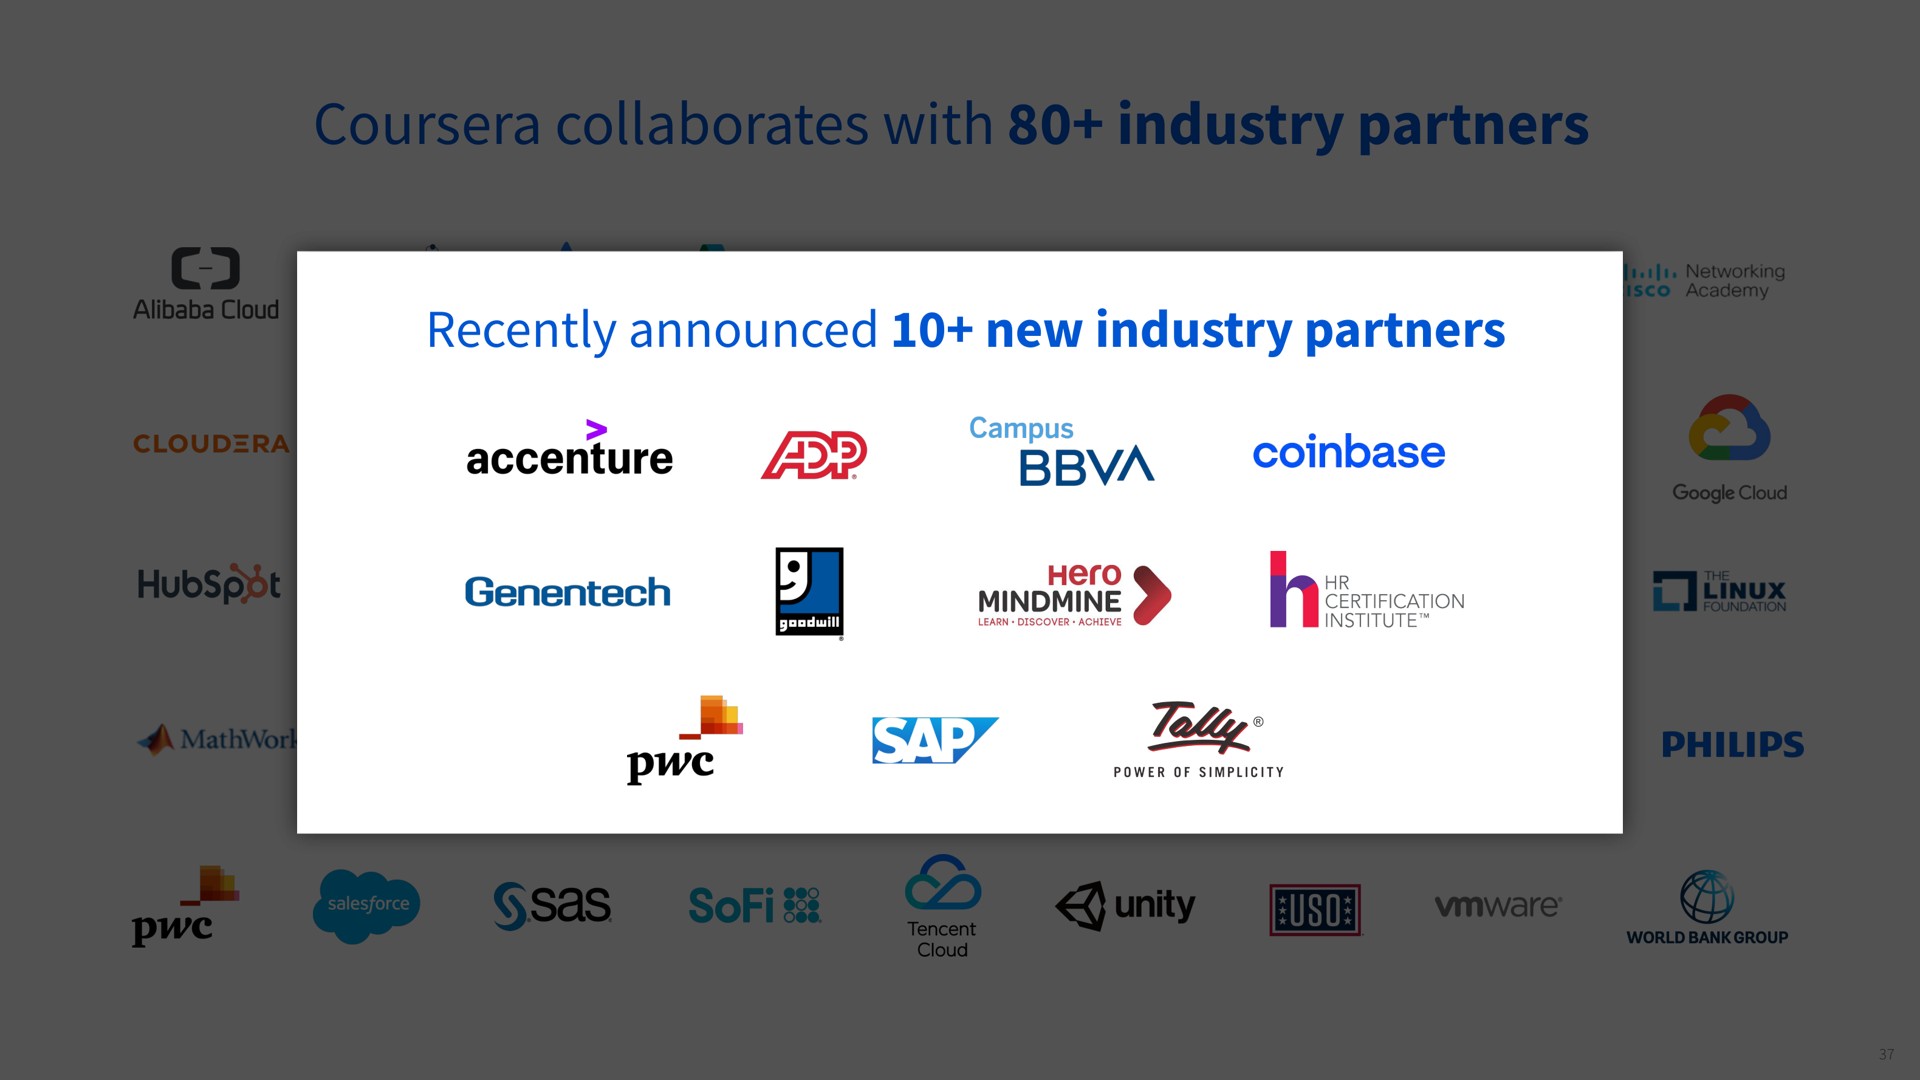 collaborates with industry partners recently announced new industry partners added new industry partners over the past year | Coursera